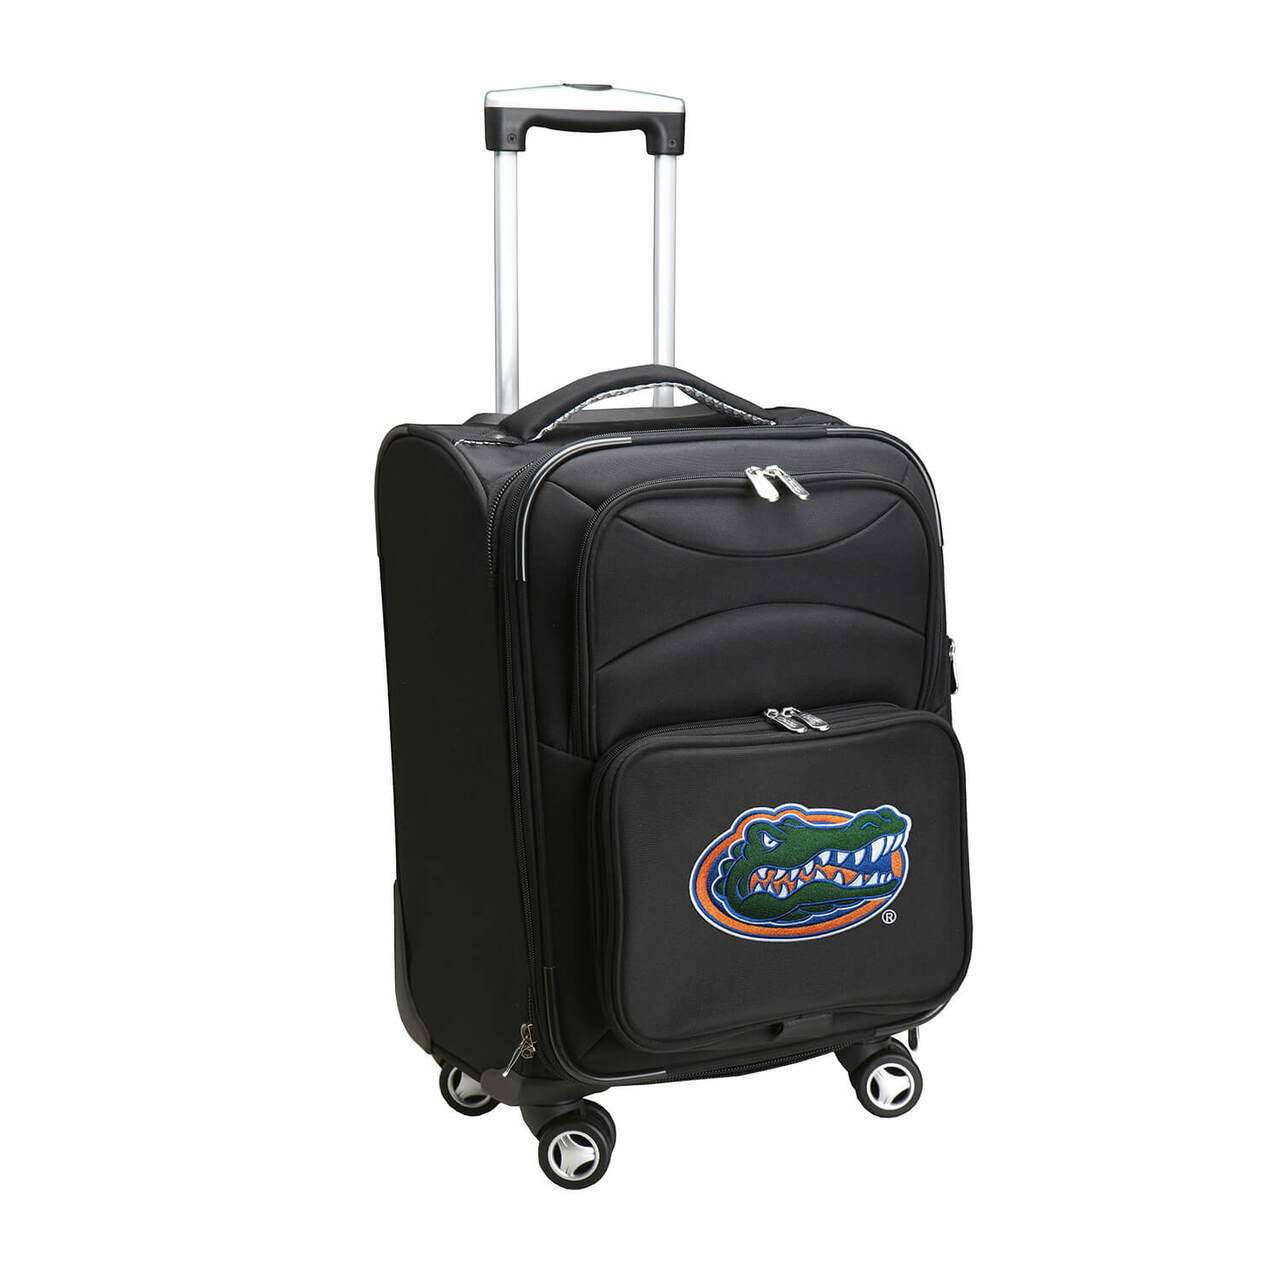 Florida Gators 20" Carry-on Spinner Luggage